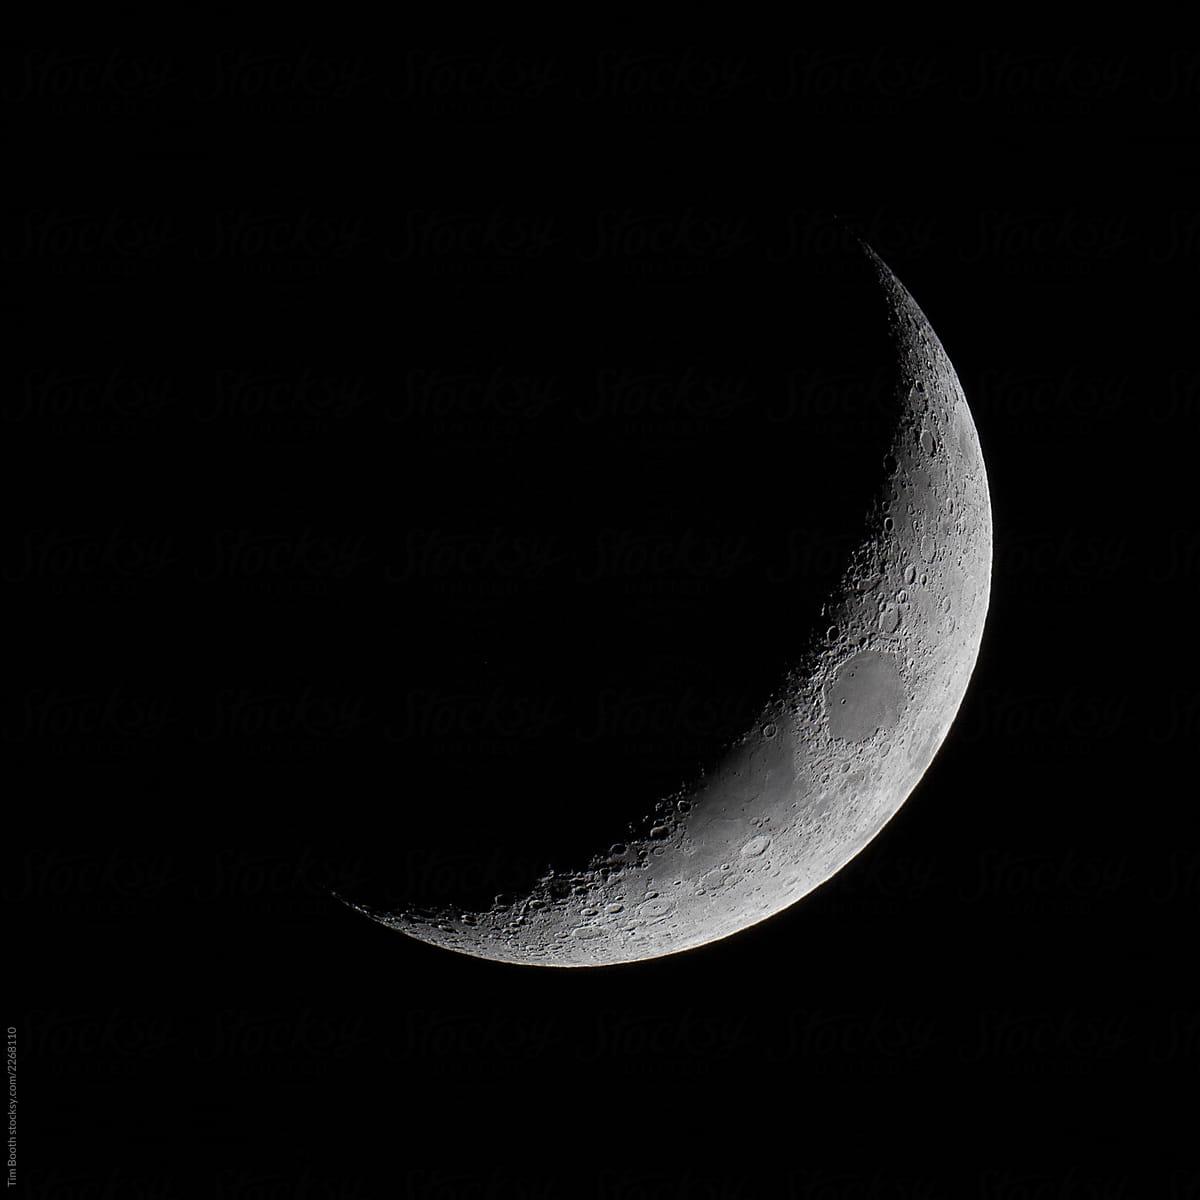 The Crescent Moon In The Night Sky